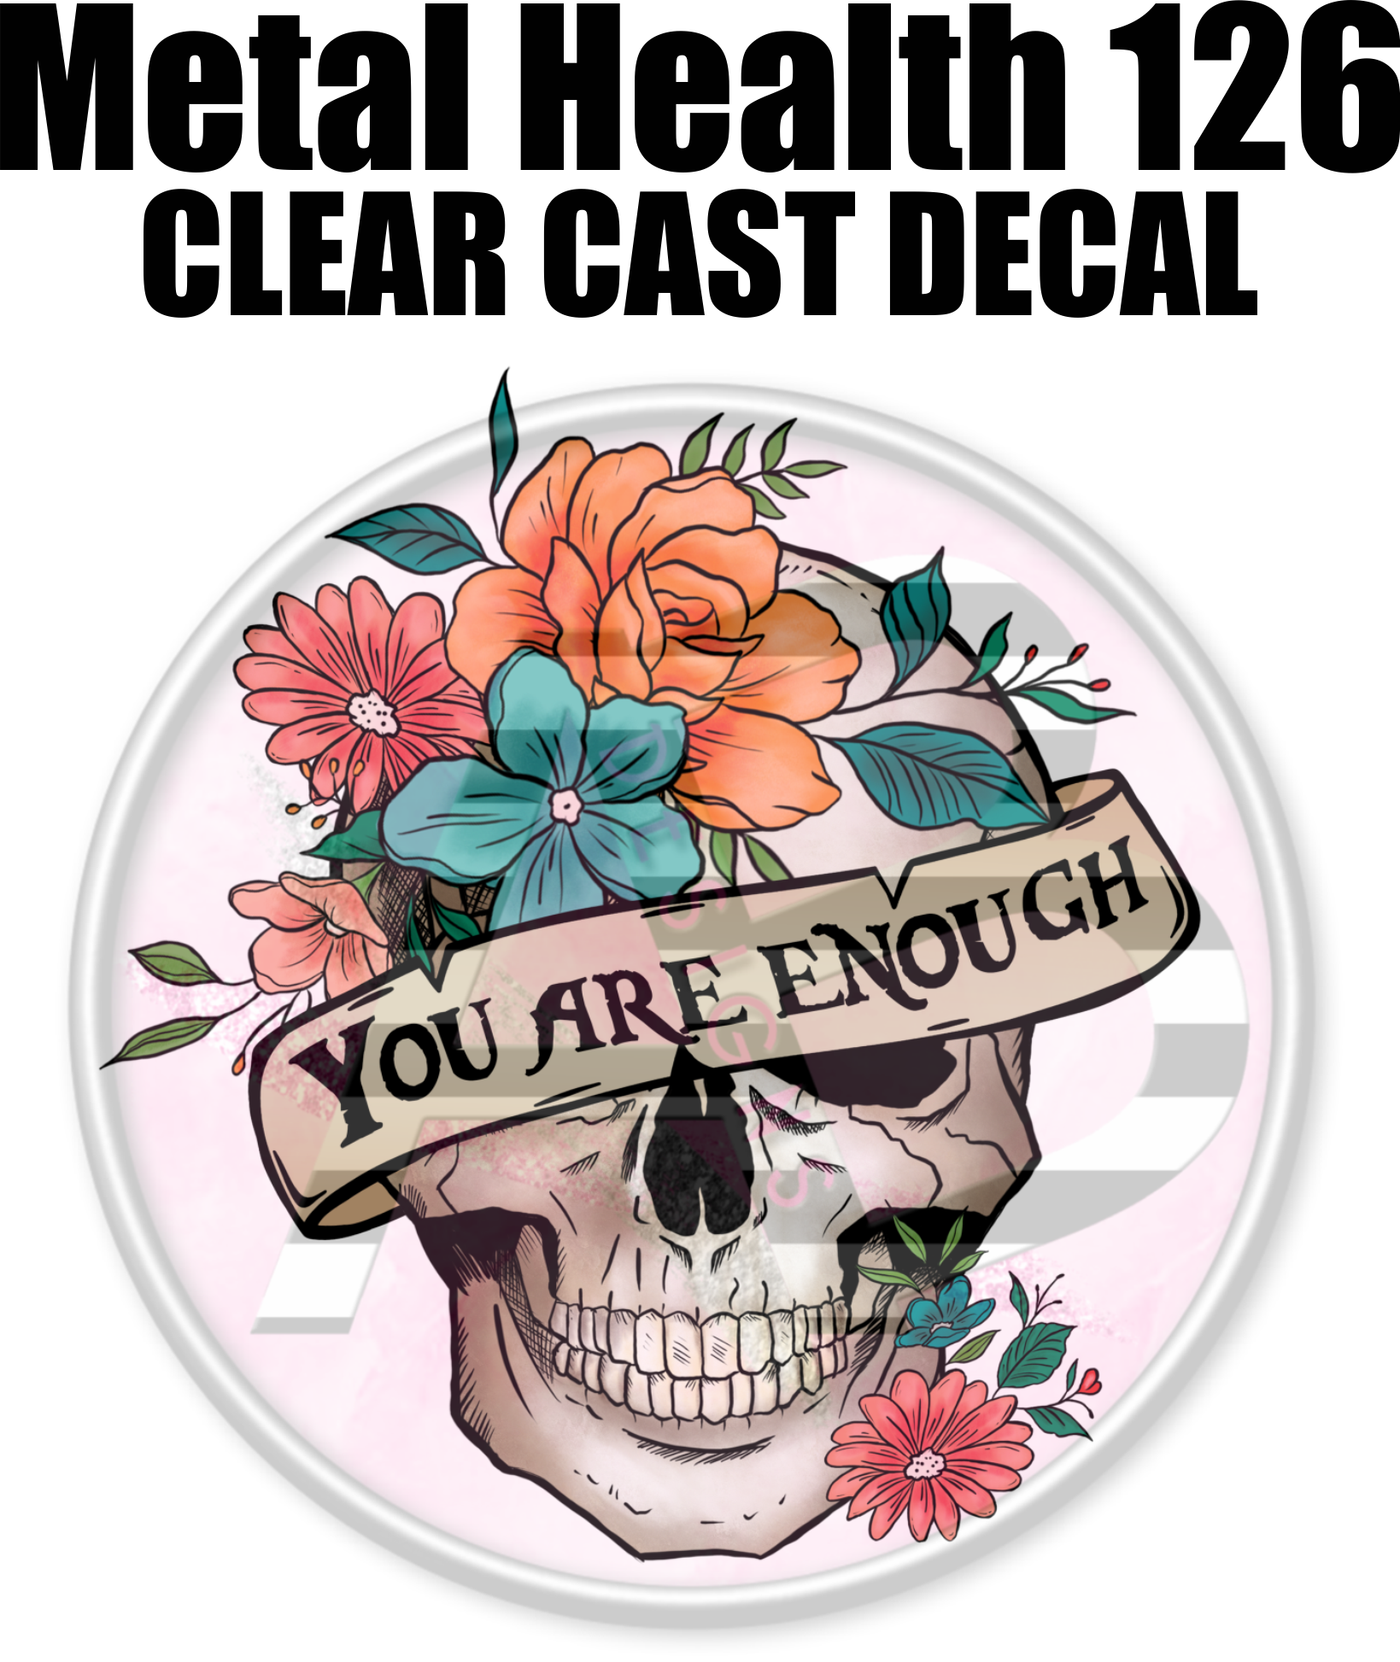 Mental Health 126 - Clear Cast Decal-595